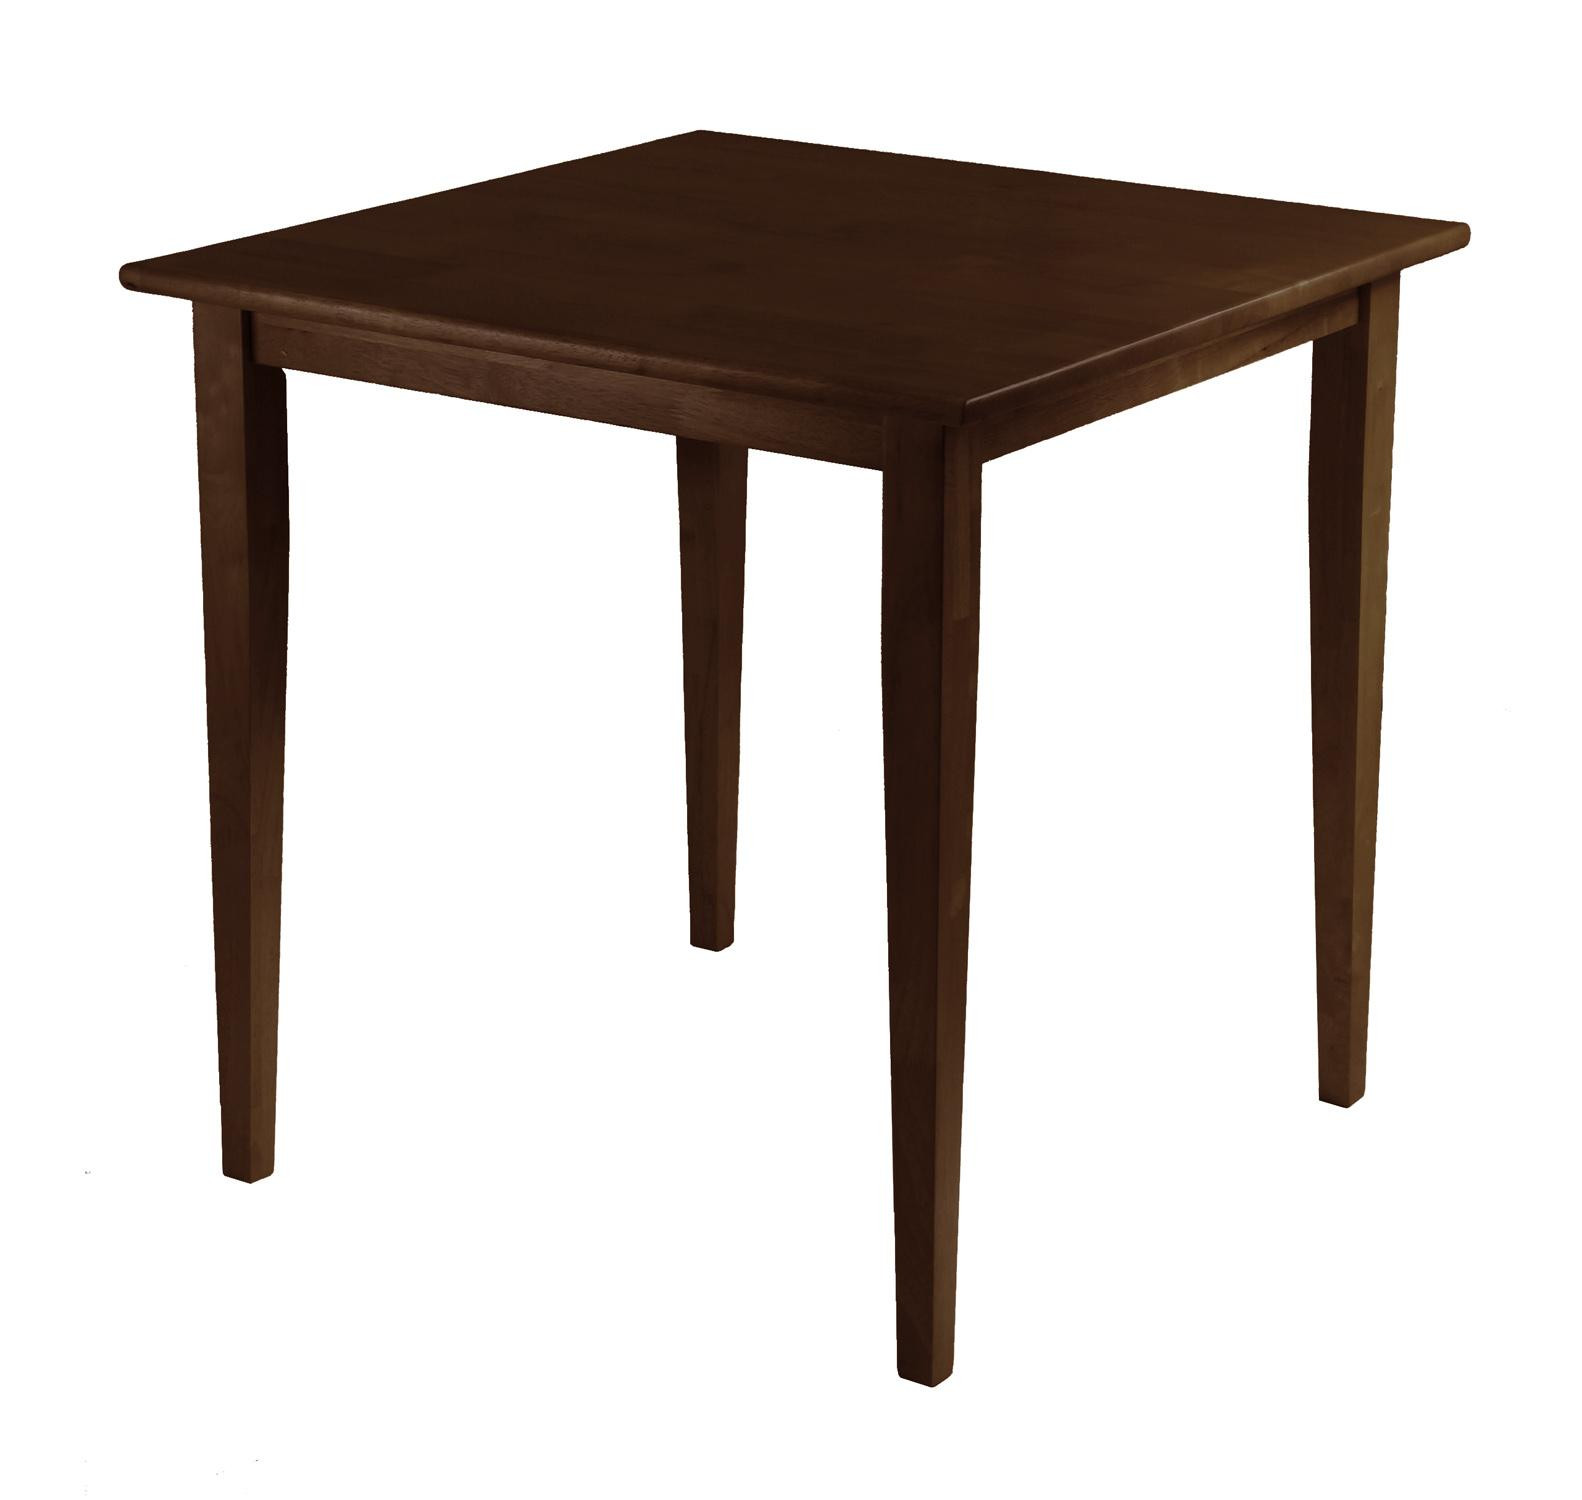 Best ideas about Square Dining Table
. Save or Pin Groveland Square Dining Table Shaker Leg Antique Walnut Now.